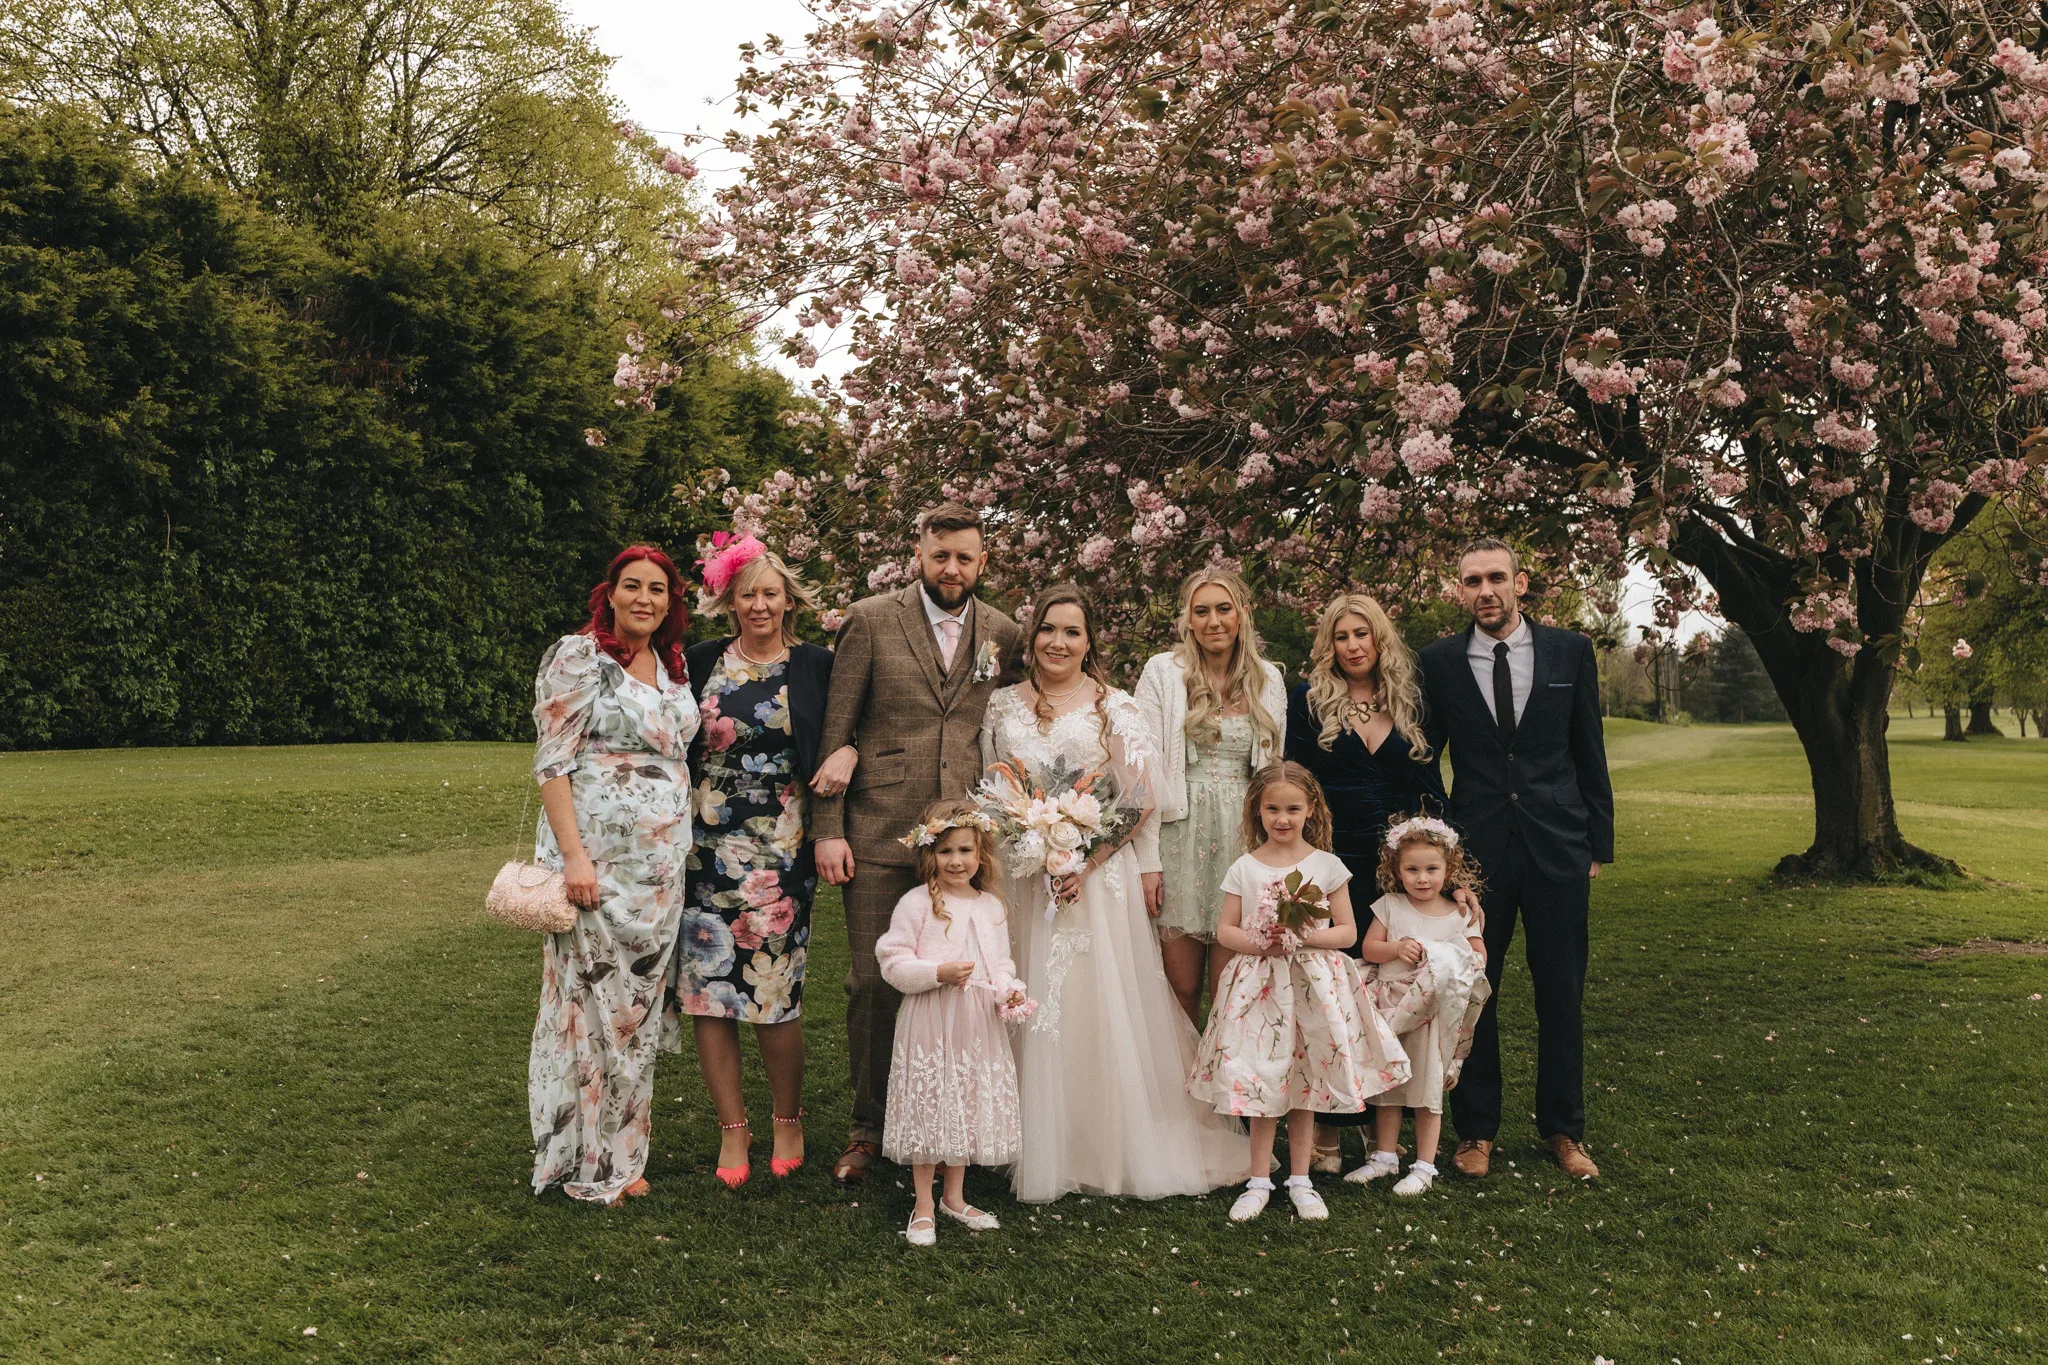 A wedding group photo under a blooming cherry blossom tree. the bride and groom are centered among nine family members and friends, wearing elegant dresses and suits, with the women holding bouquets. the setting is a lush green park.